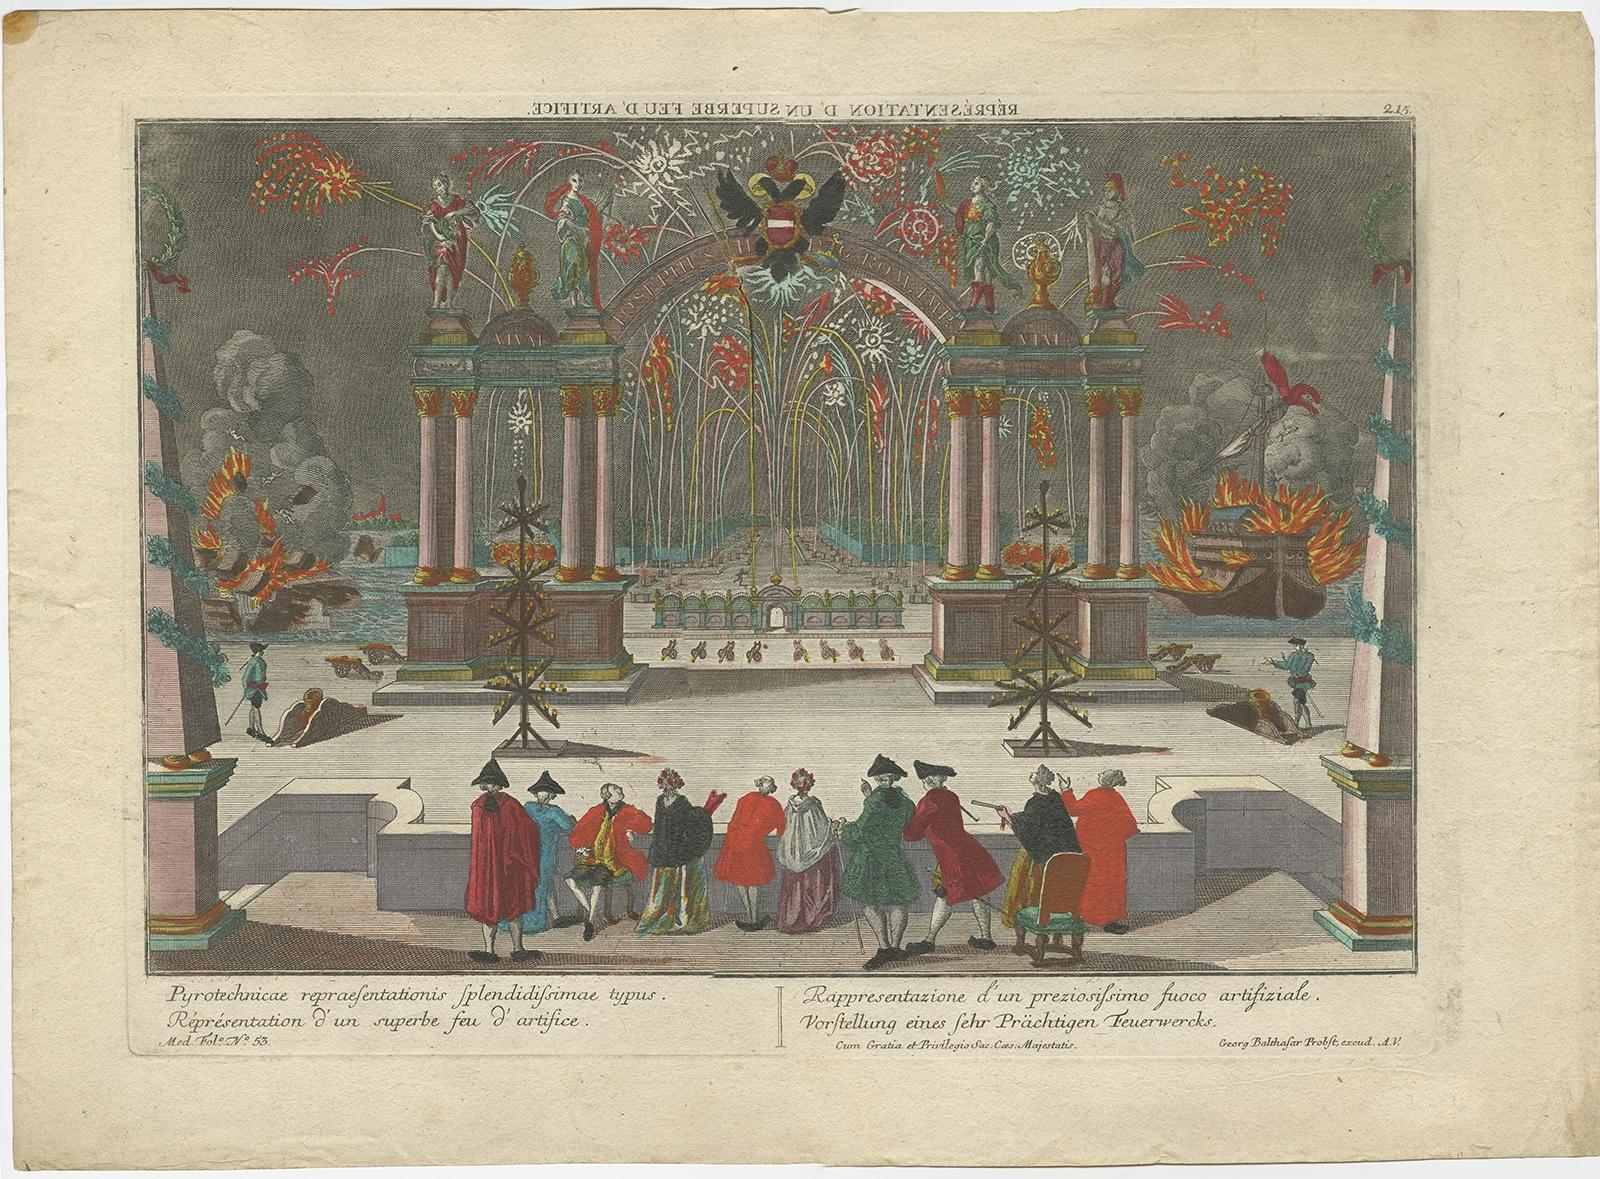 Antique print titled 'Pyrotechnicae repraesentationis splendidissimae typus'. 

Optical view depicting a scene with fireworks (probably on the occasion of the coronation of the German emperor Joseph II (1741-1790) in 1765). With Latin, French,